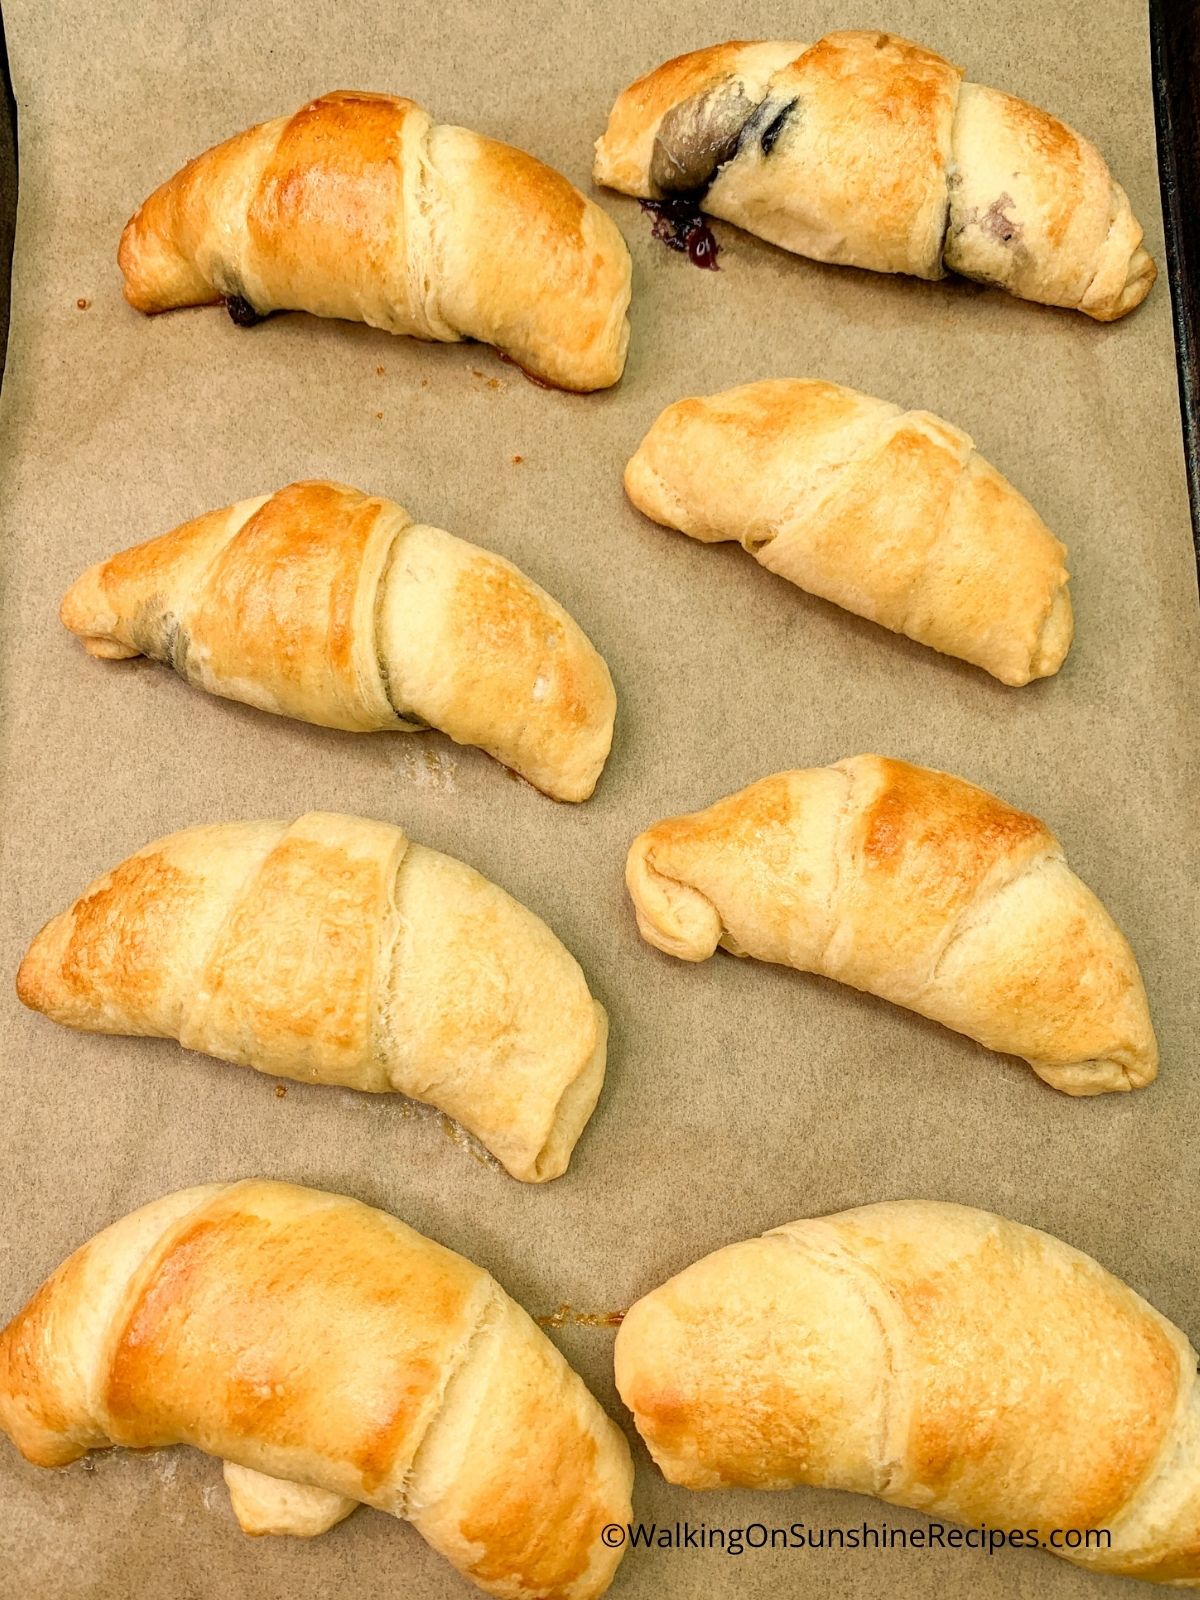 How long to bake crescent rolls